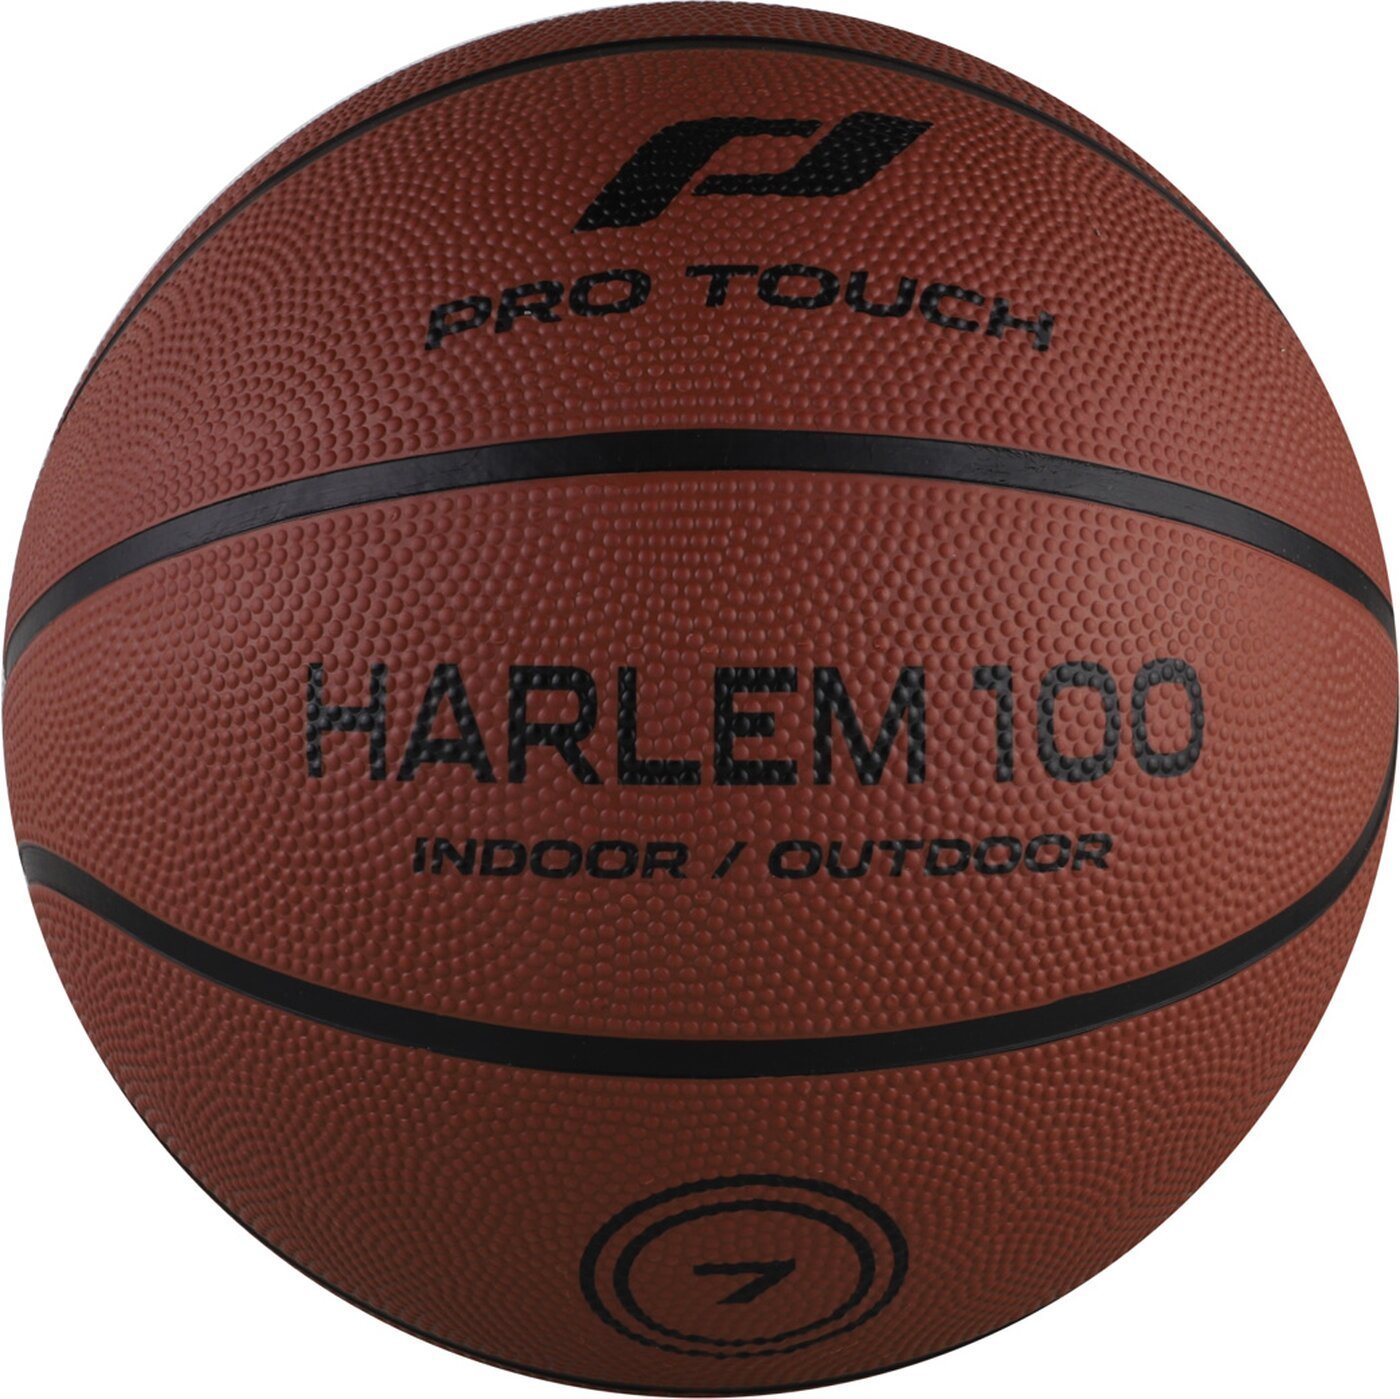 Pro Touch Basketball Basketball Harlem 100 901 von Pro Touch